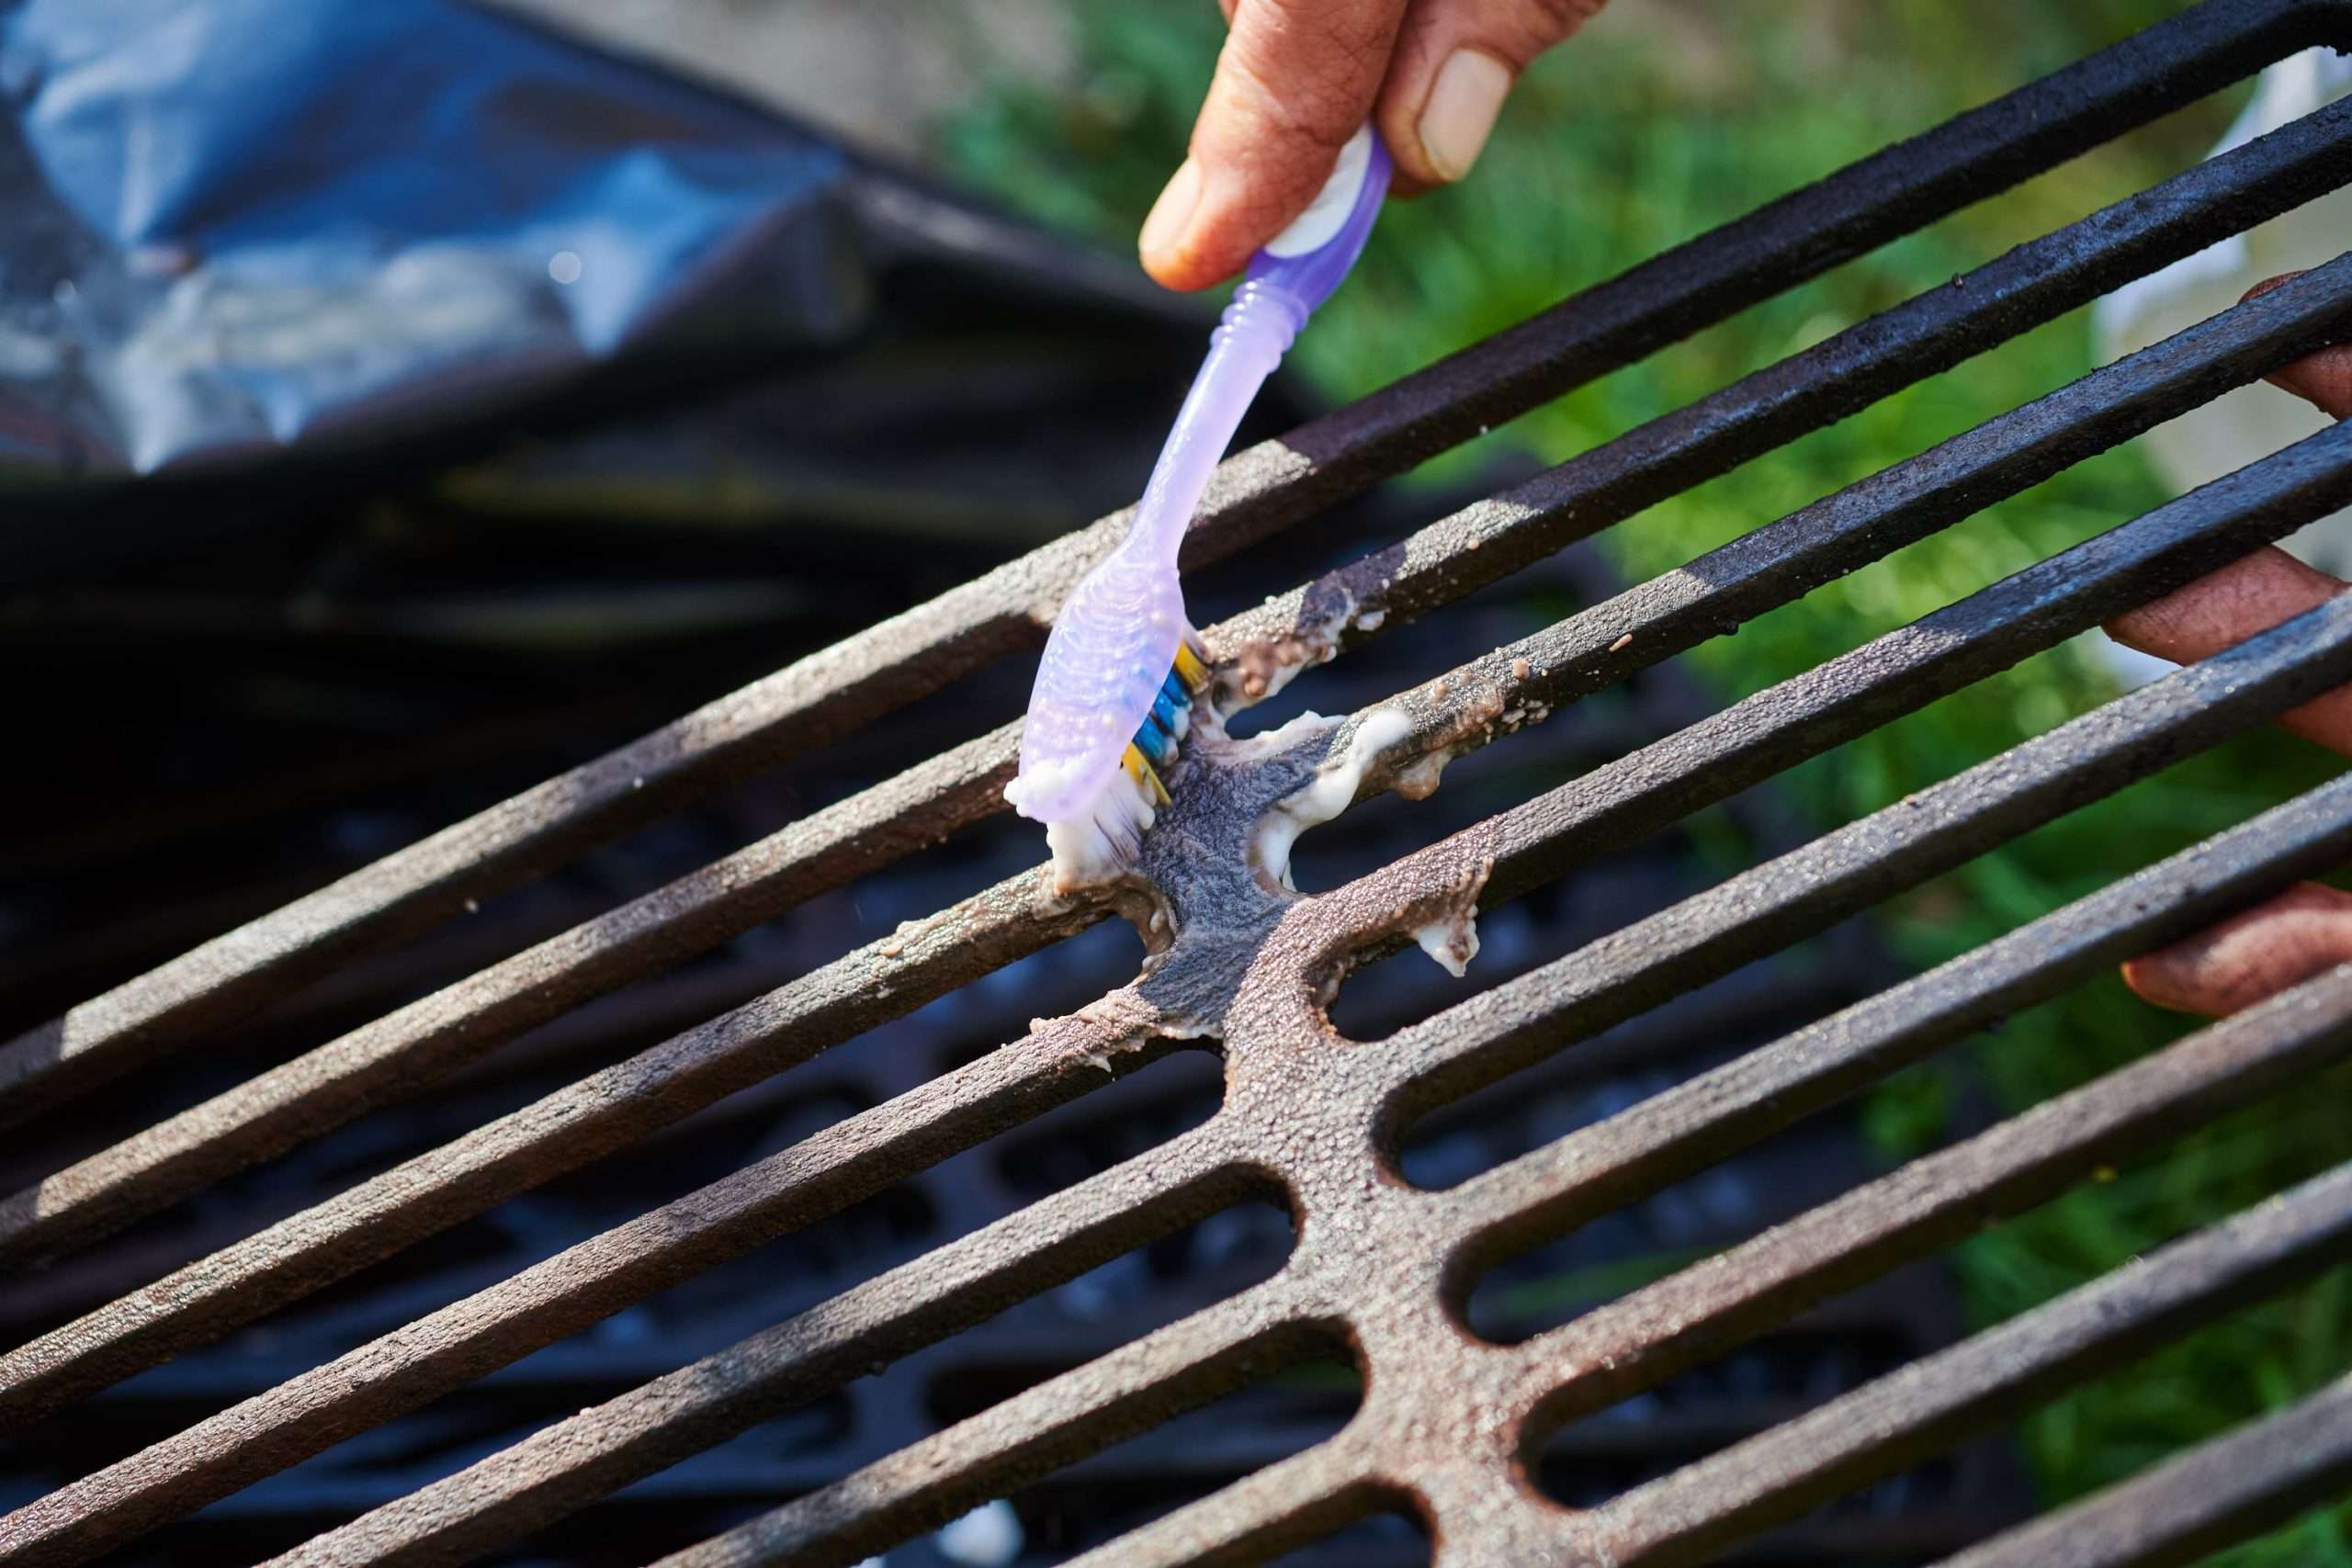 How To Clean Grill Grates